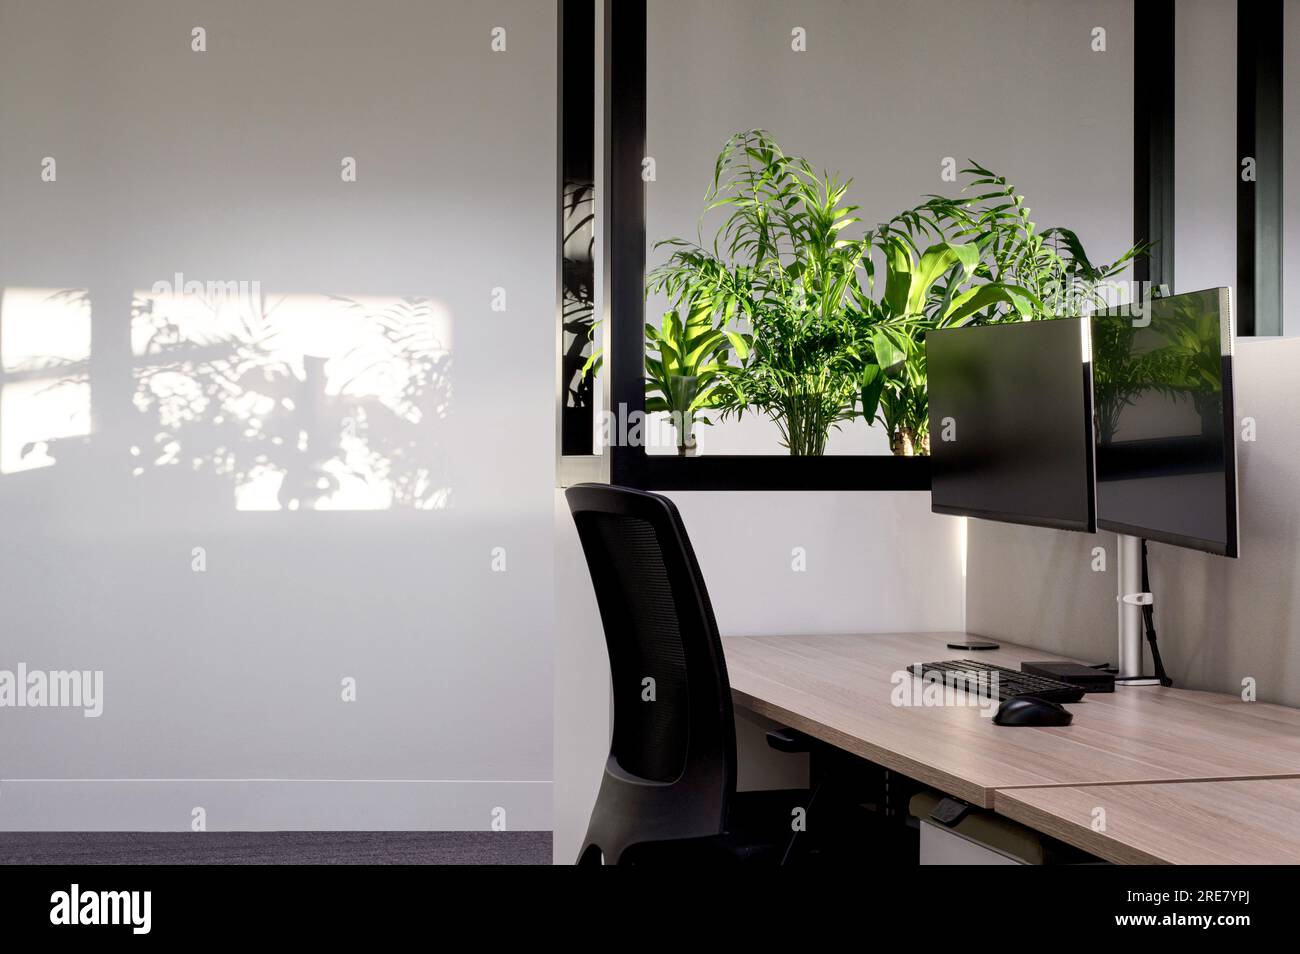 Neat office interior with computers and plants Stock Photo